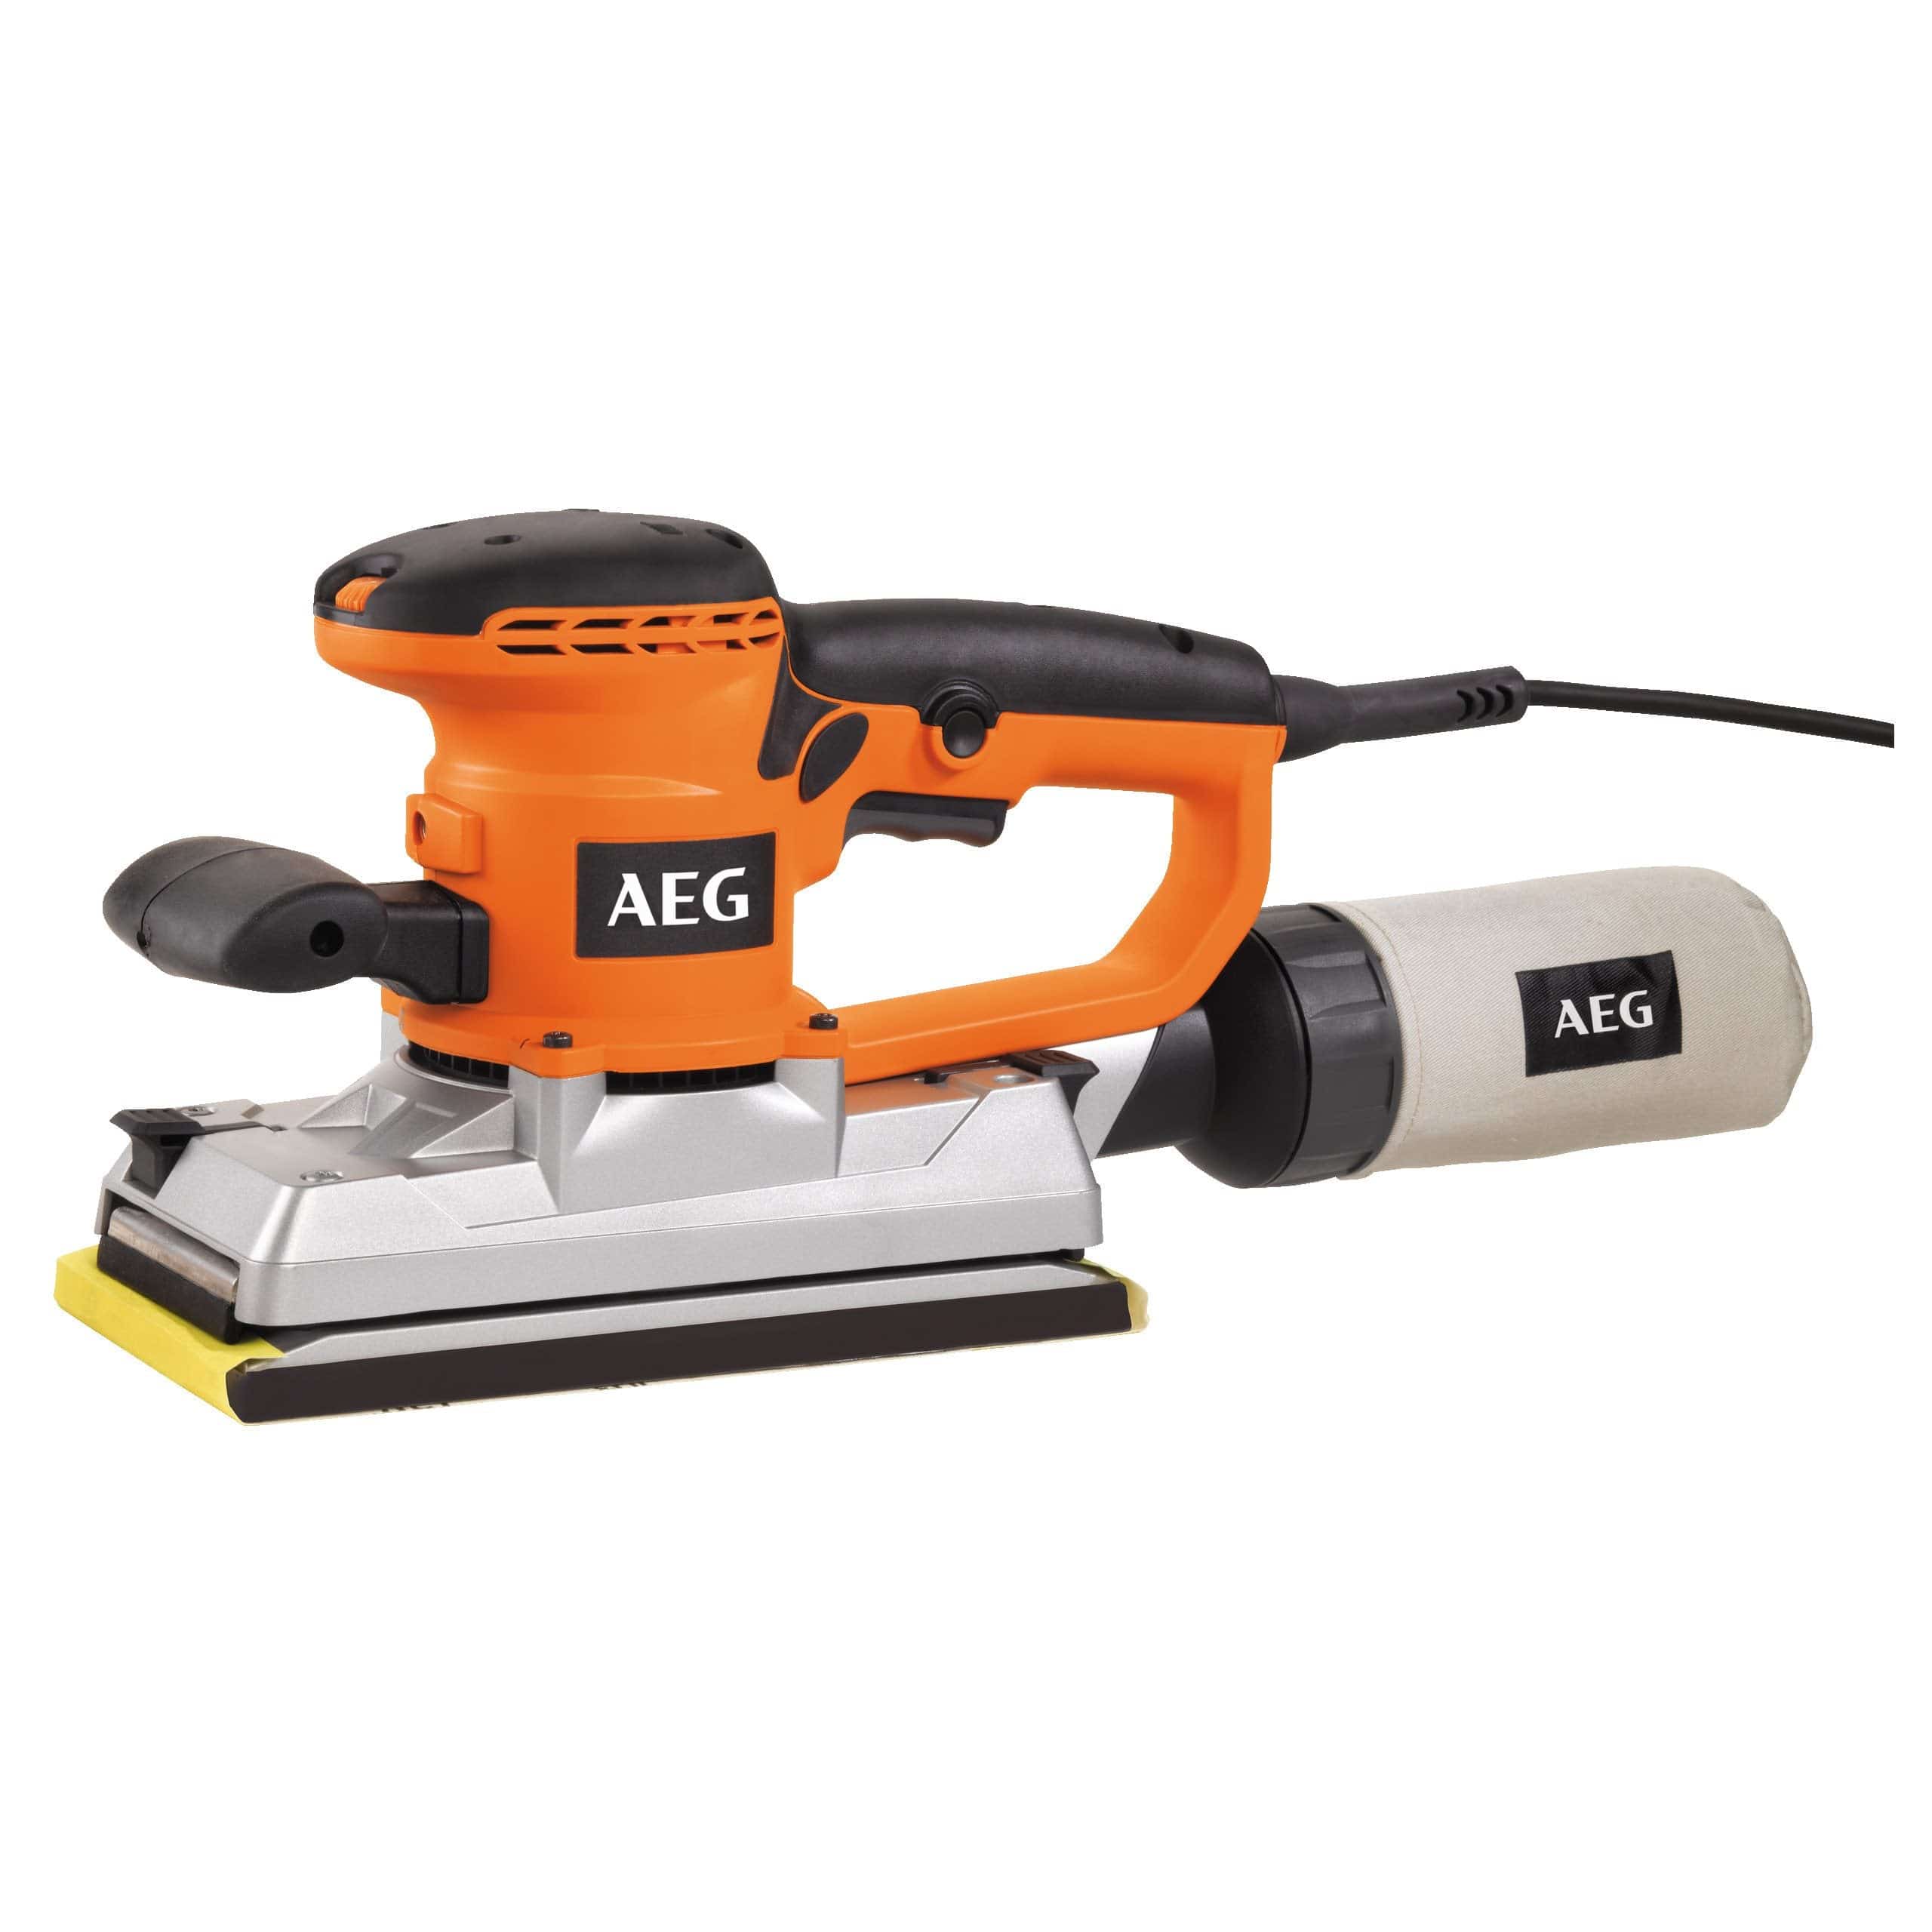 AEG 82mm Electric Planer 750W - PL750 | Supply Master Accra, Ghana Planer & Joiner Buy Tools hardware Building materials